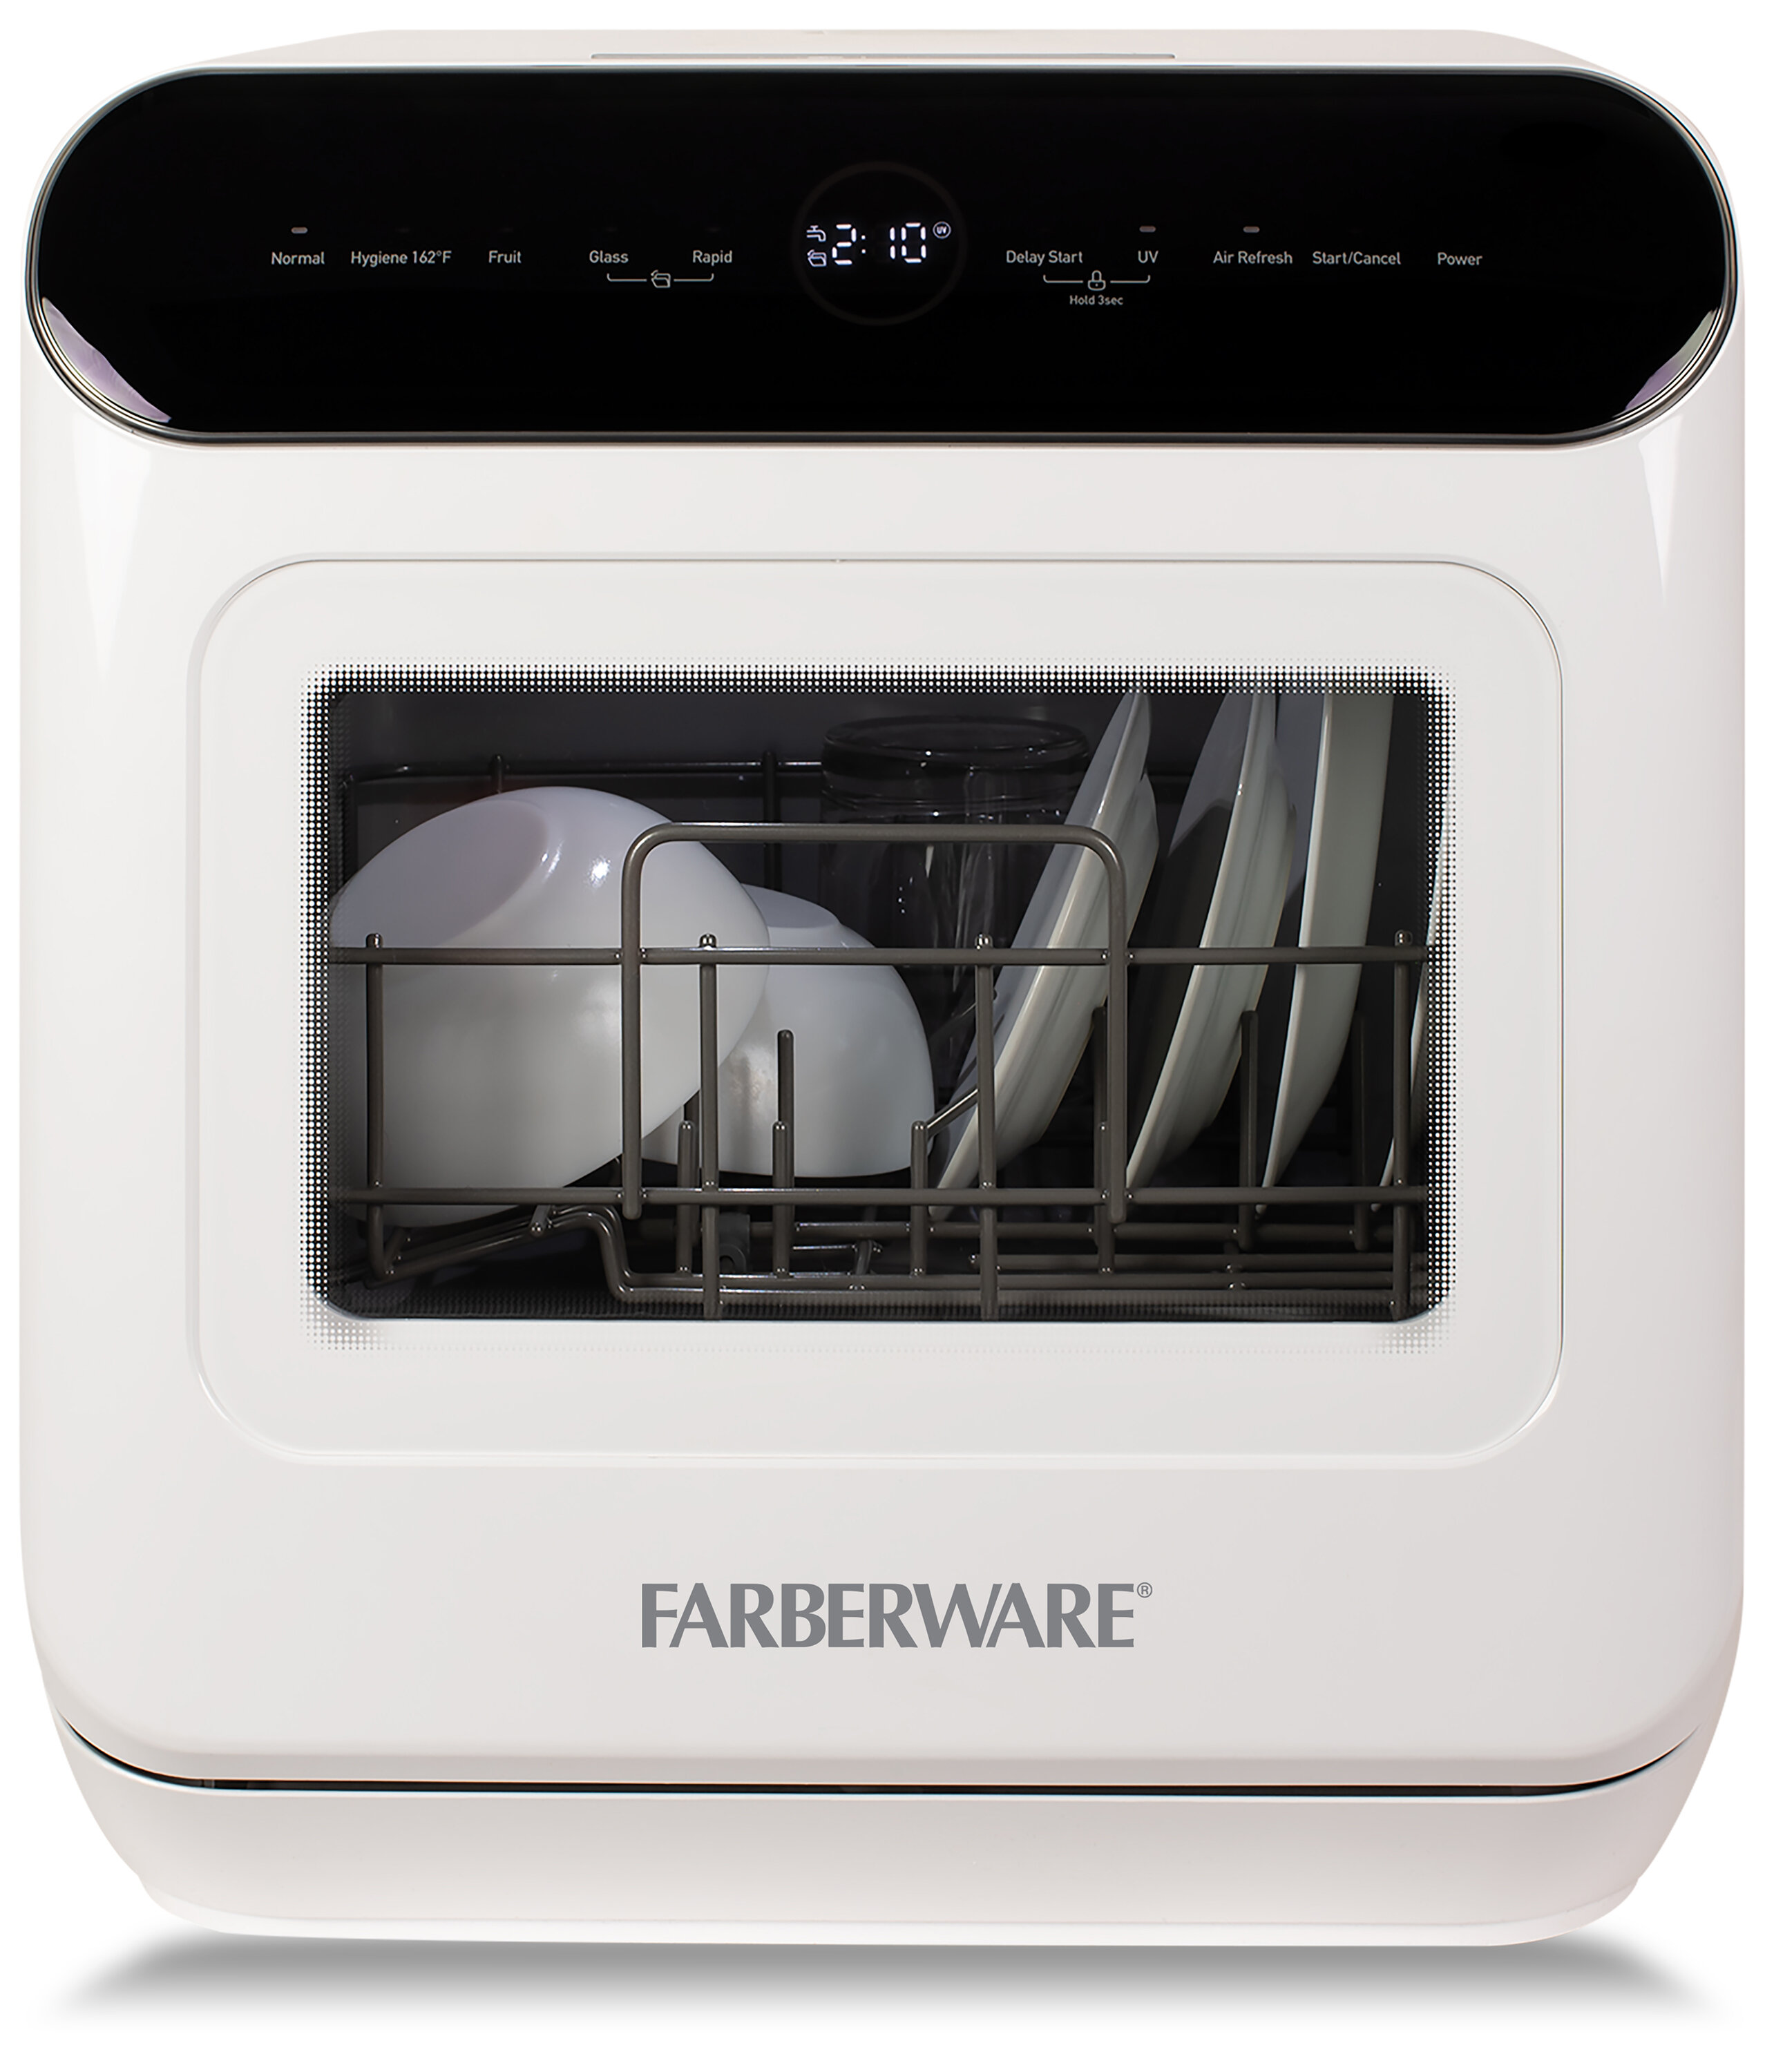 Frigidaire Gallery 24 49 dBA Built-in Fully Integrated Dishwasher